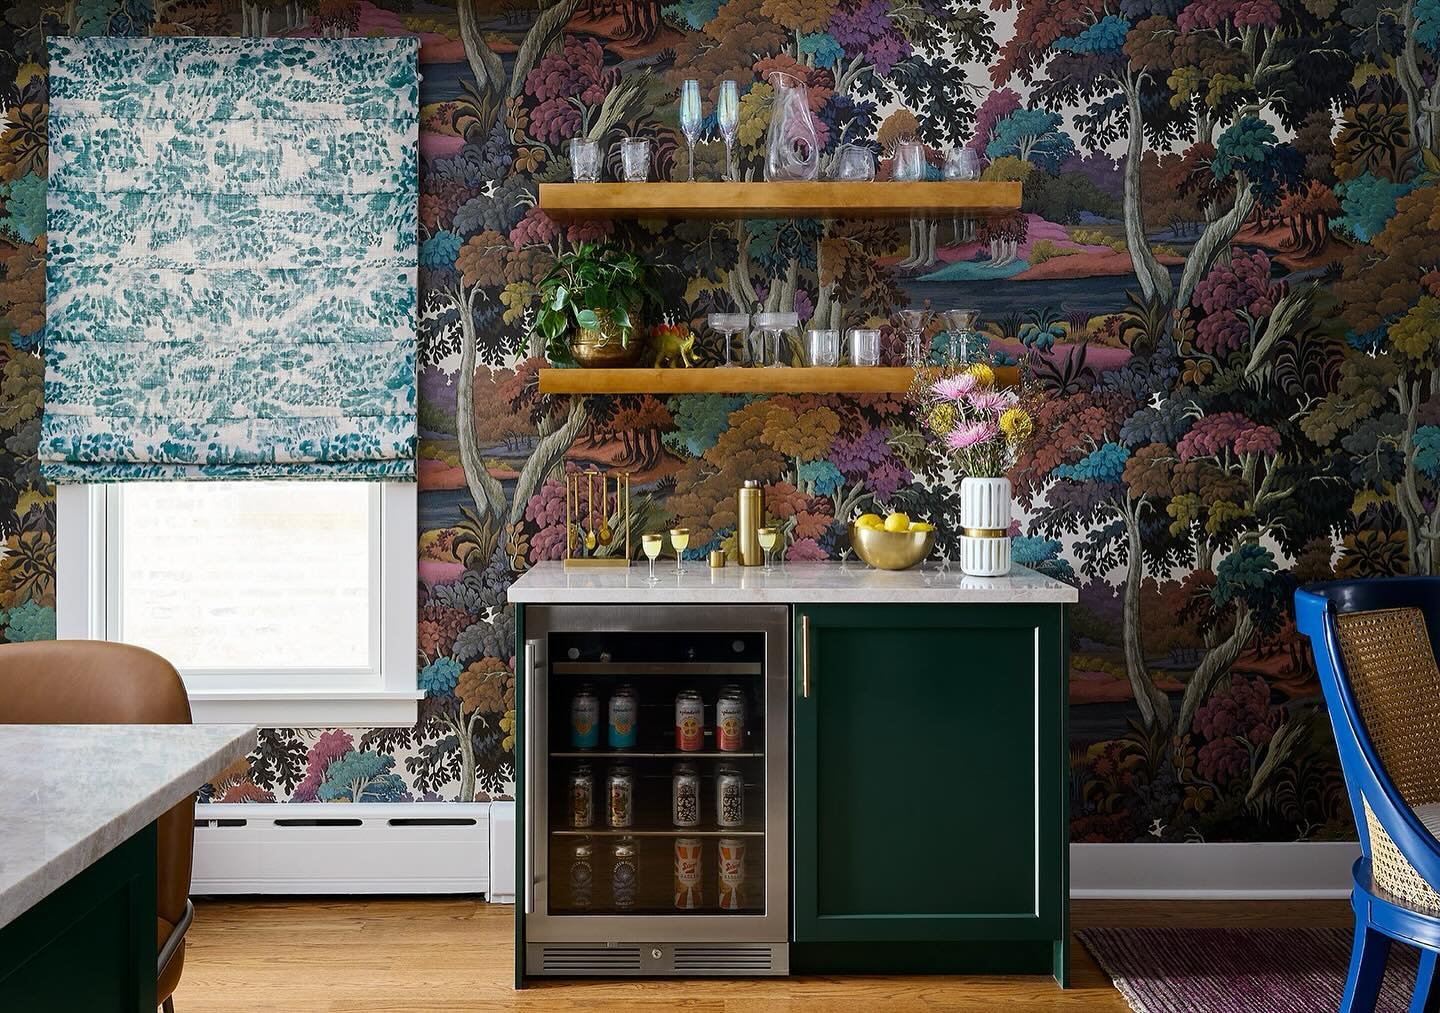 Drinks are served. What better to bridge the gap between kitchen and dining than a beverage station? It&rsquo;s also a cocktail bar, impromptu buffet, overflow storage, display space, plant shelf, dinosaur home. City spaces work the hardest. 🍸️ Can 